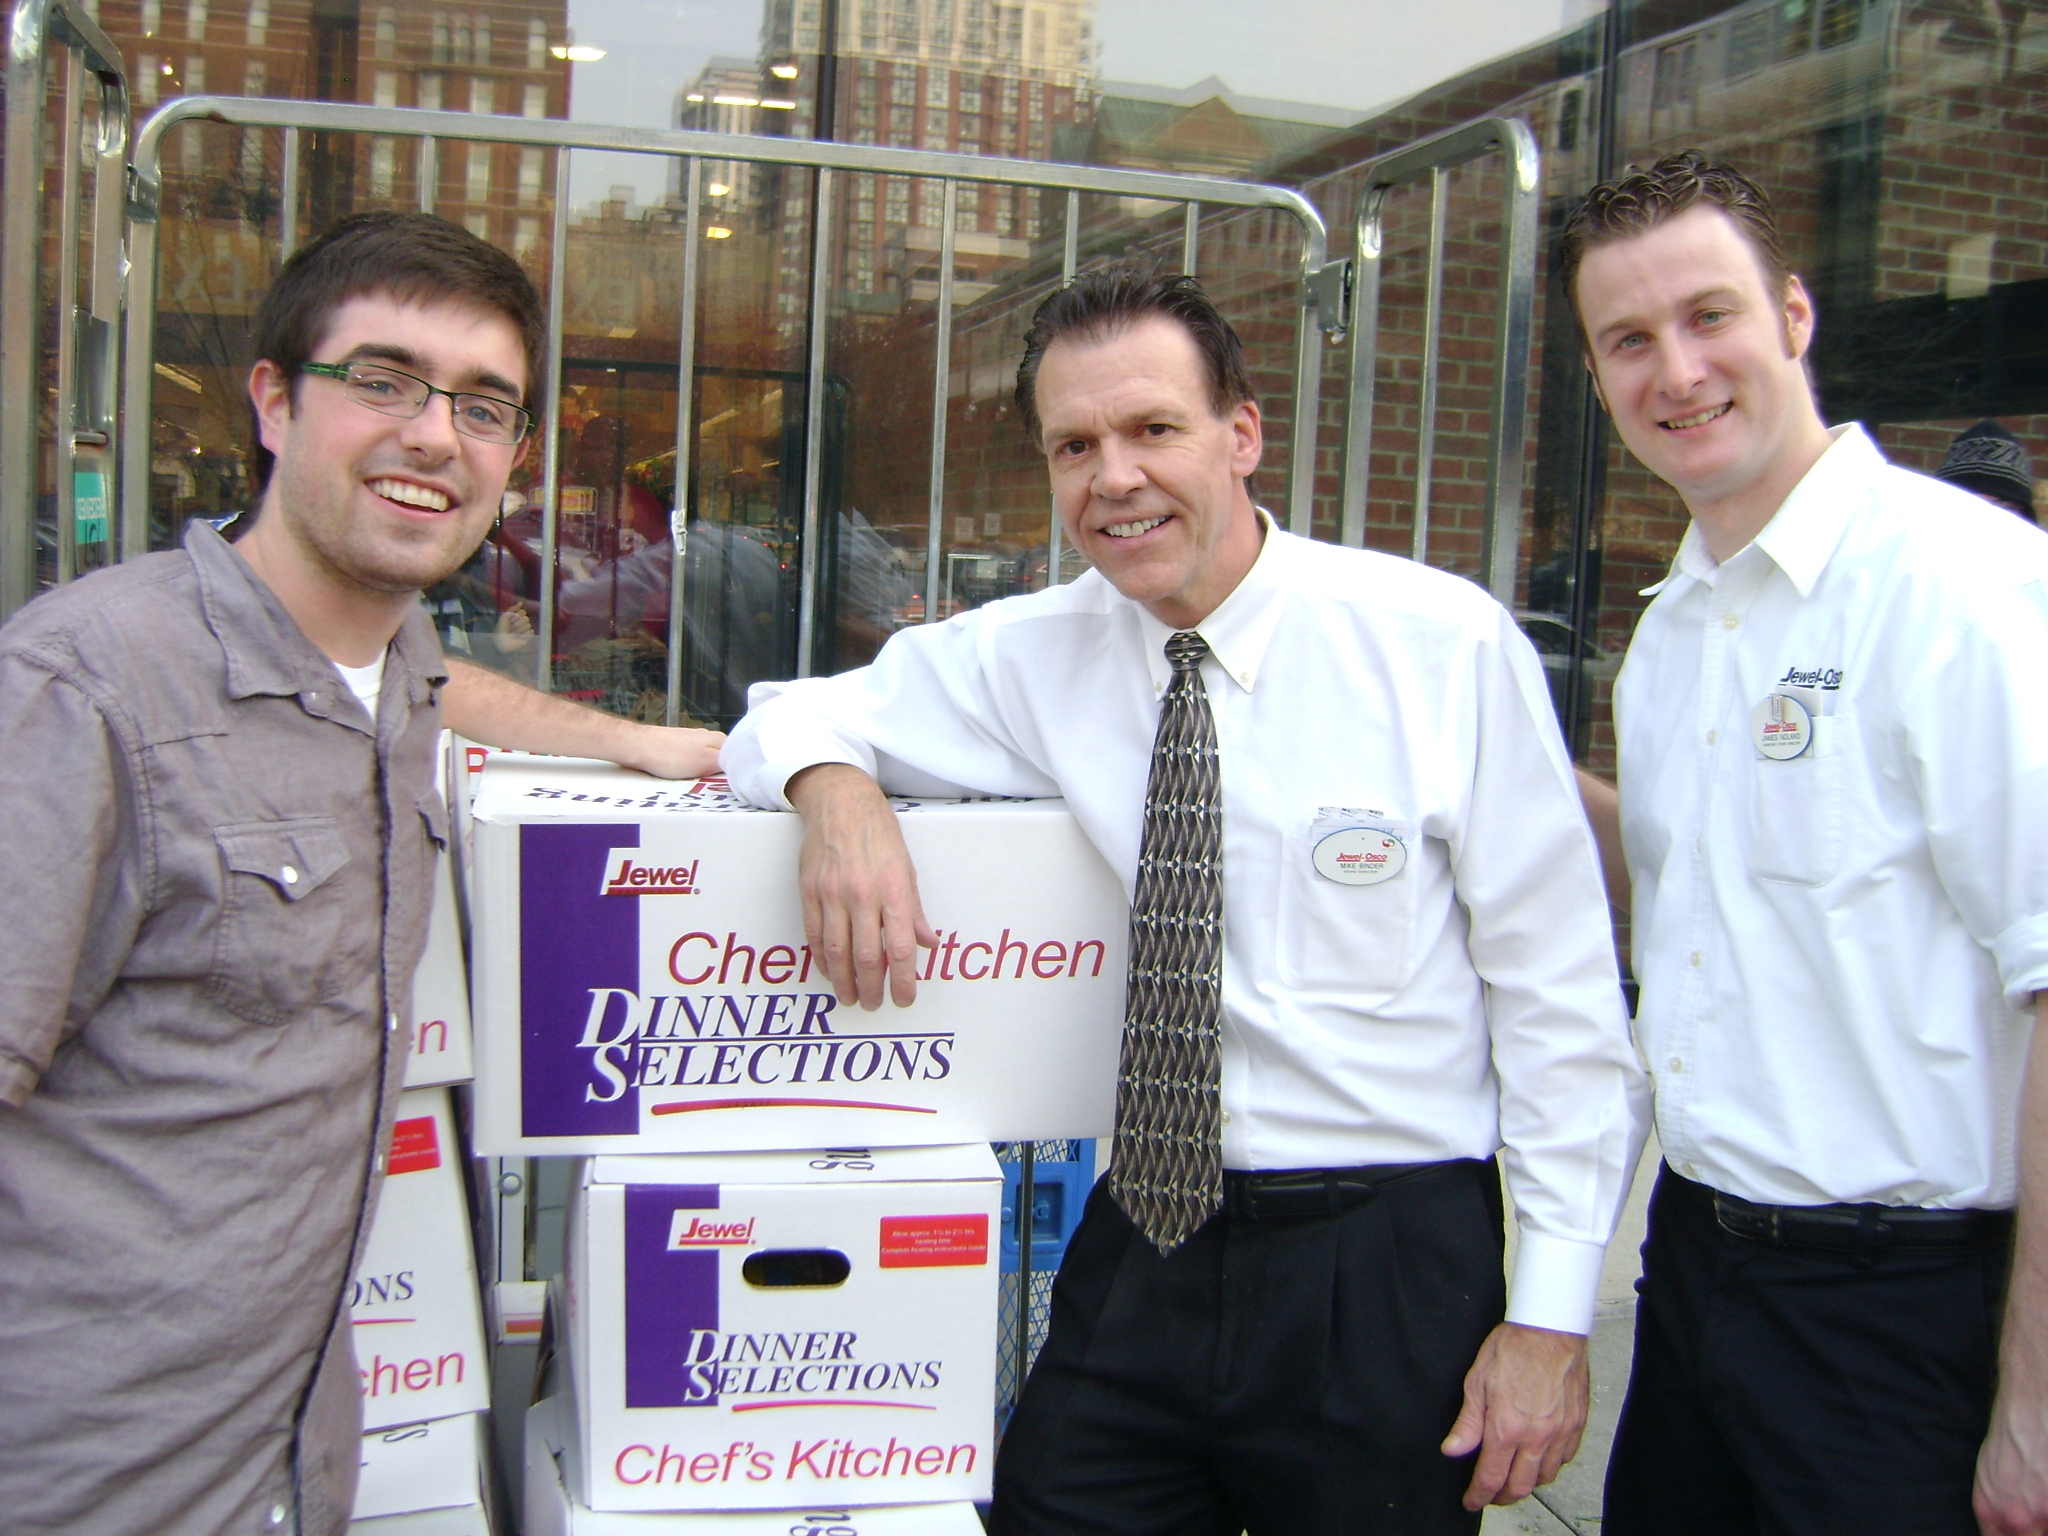 BVC Chicago 2012 Ted Kain receiving donations fro Jewel grocery.jpg